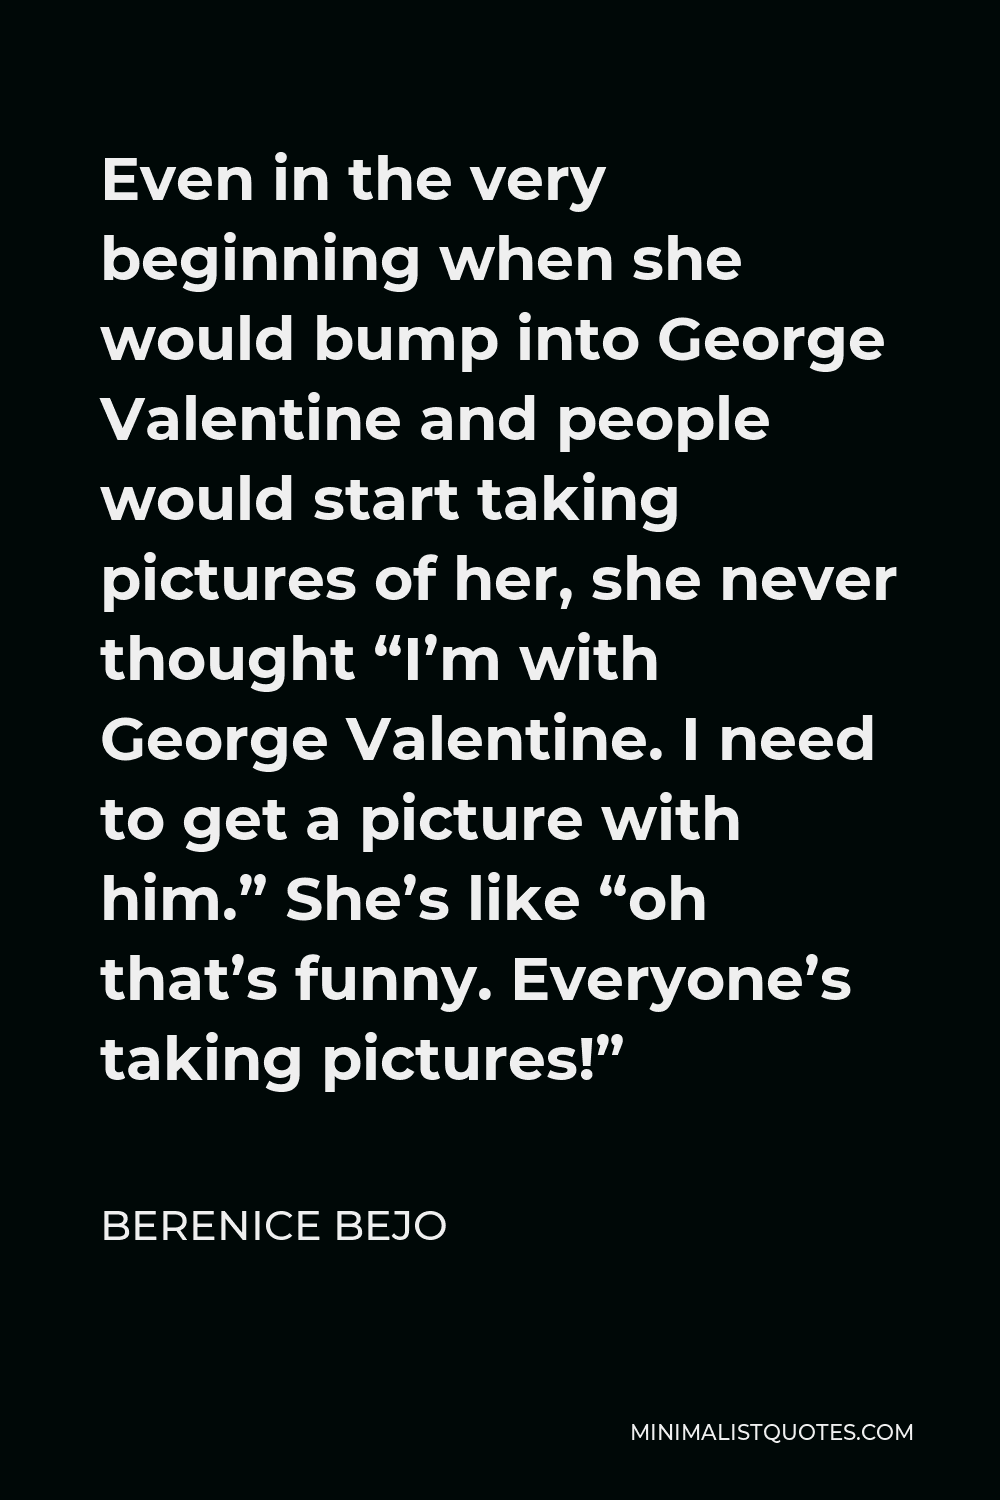 Berenice Bejo Quote - Even in the very beginning when she would bump into George Valentine and people would start taking pictures of her, she never thought “I’m with George Valentine. I need to get a picture with him.” She’s like “oh that’s funny. Everyone’s taking pictures!”